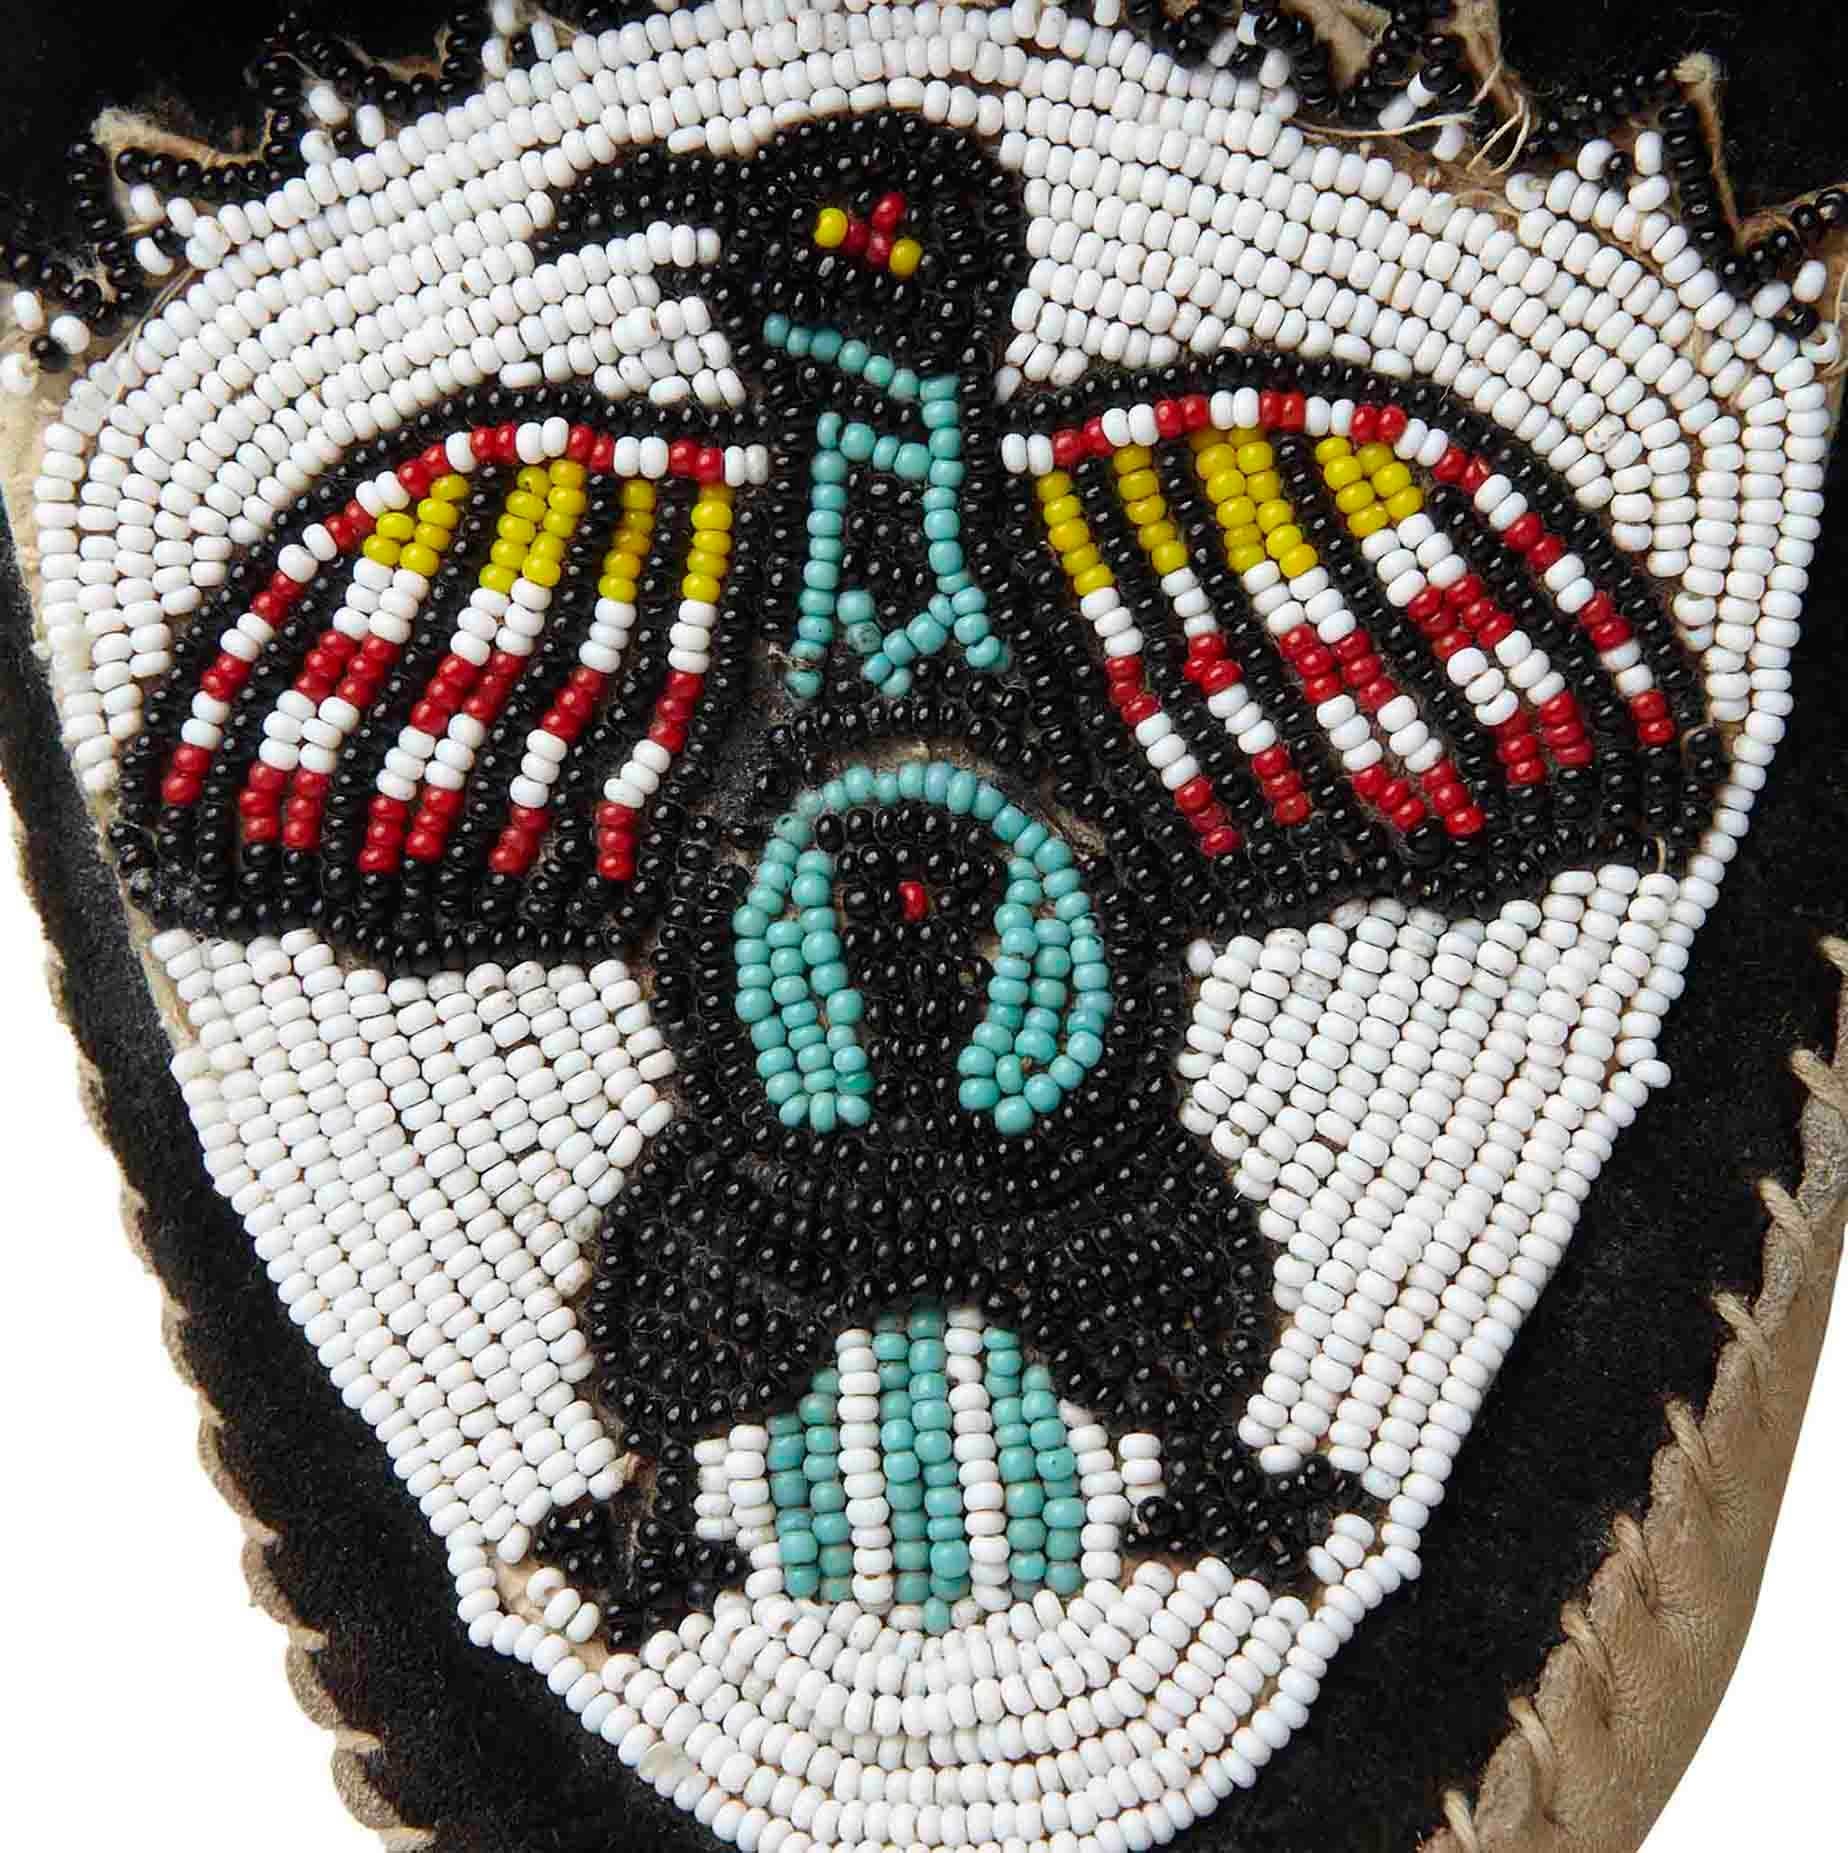 Product Details: Hand Beaded - Native American - Suede Moccasins - Leather Front Tie - Sheepskin Lining - Leather Soles 
Artist: Unknown 
Era: c.1920
Fabric Content: Suede - Hand Beading - Leather - Sheepskin
Size: UK 5
Condition: Rare - Collectors